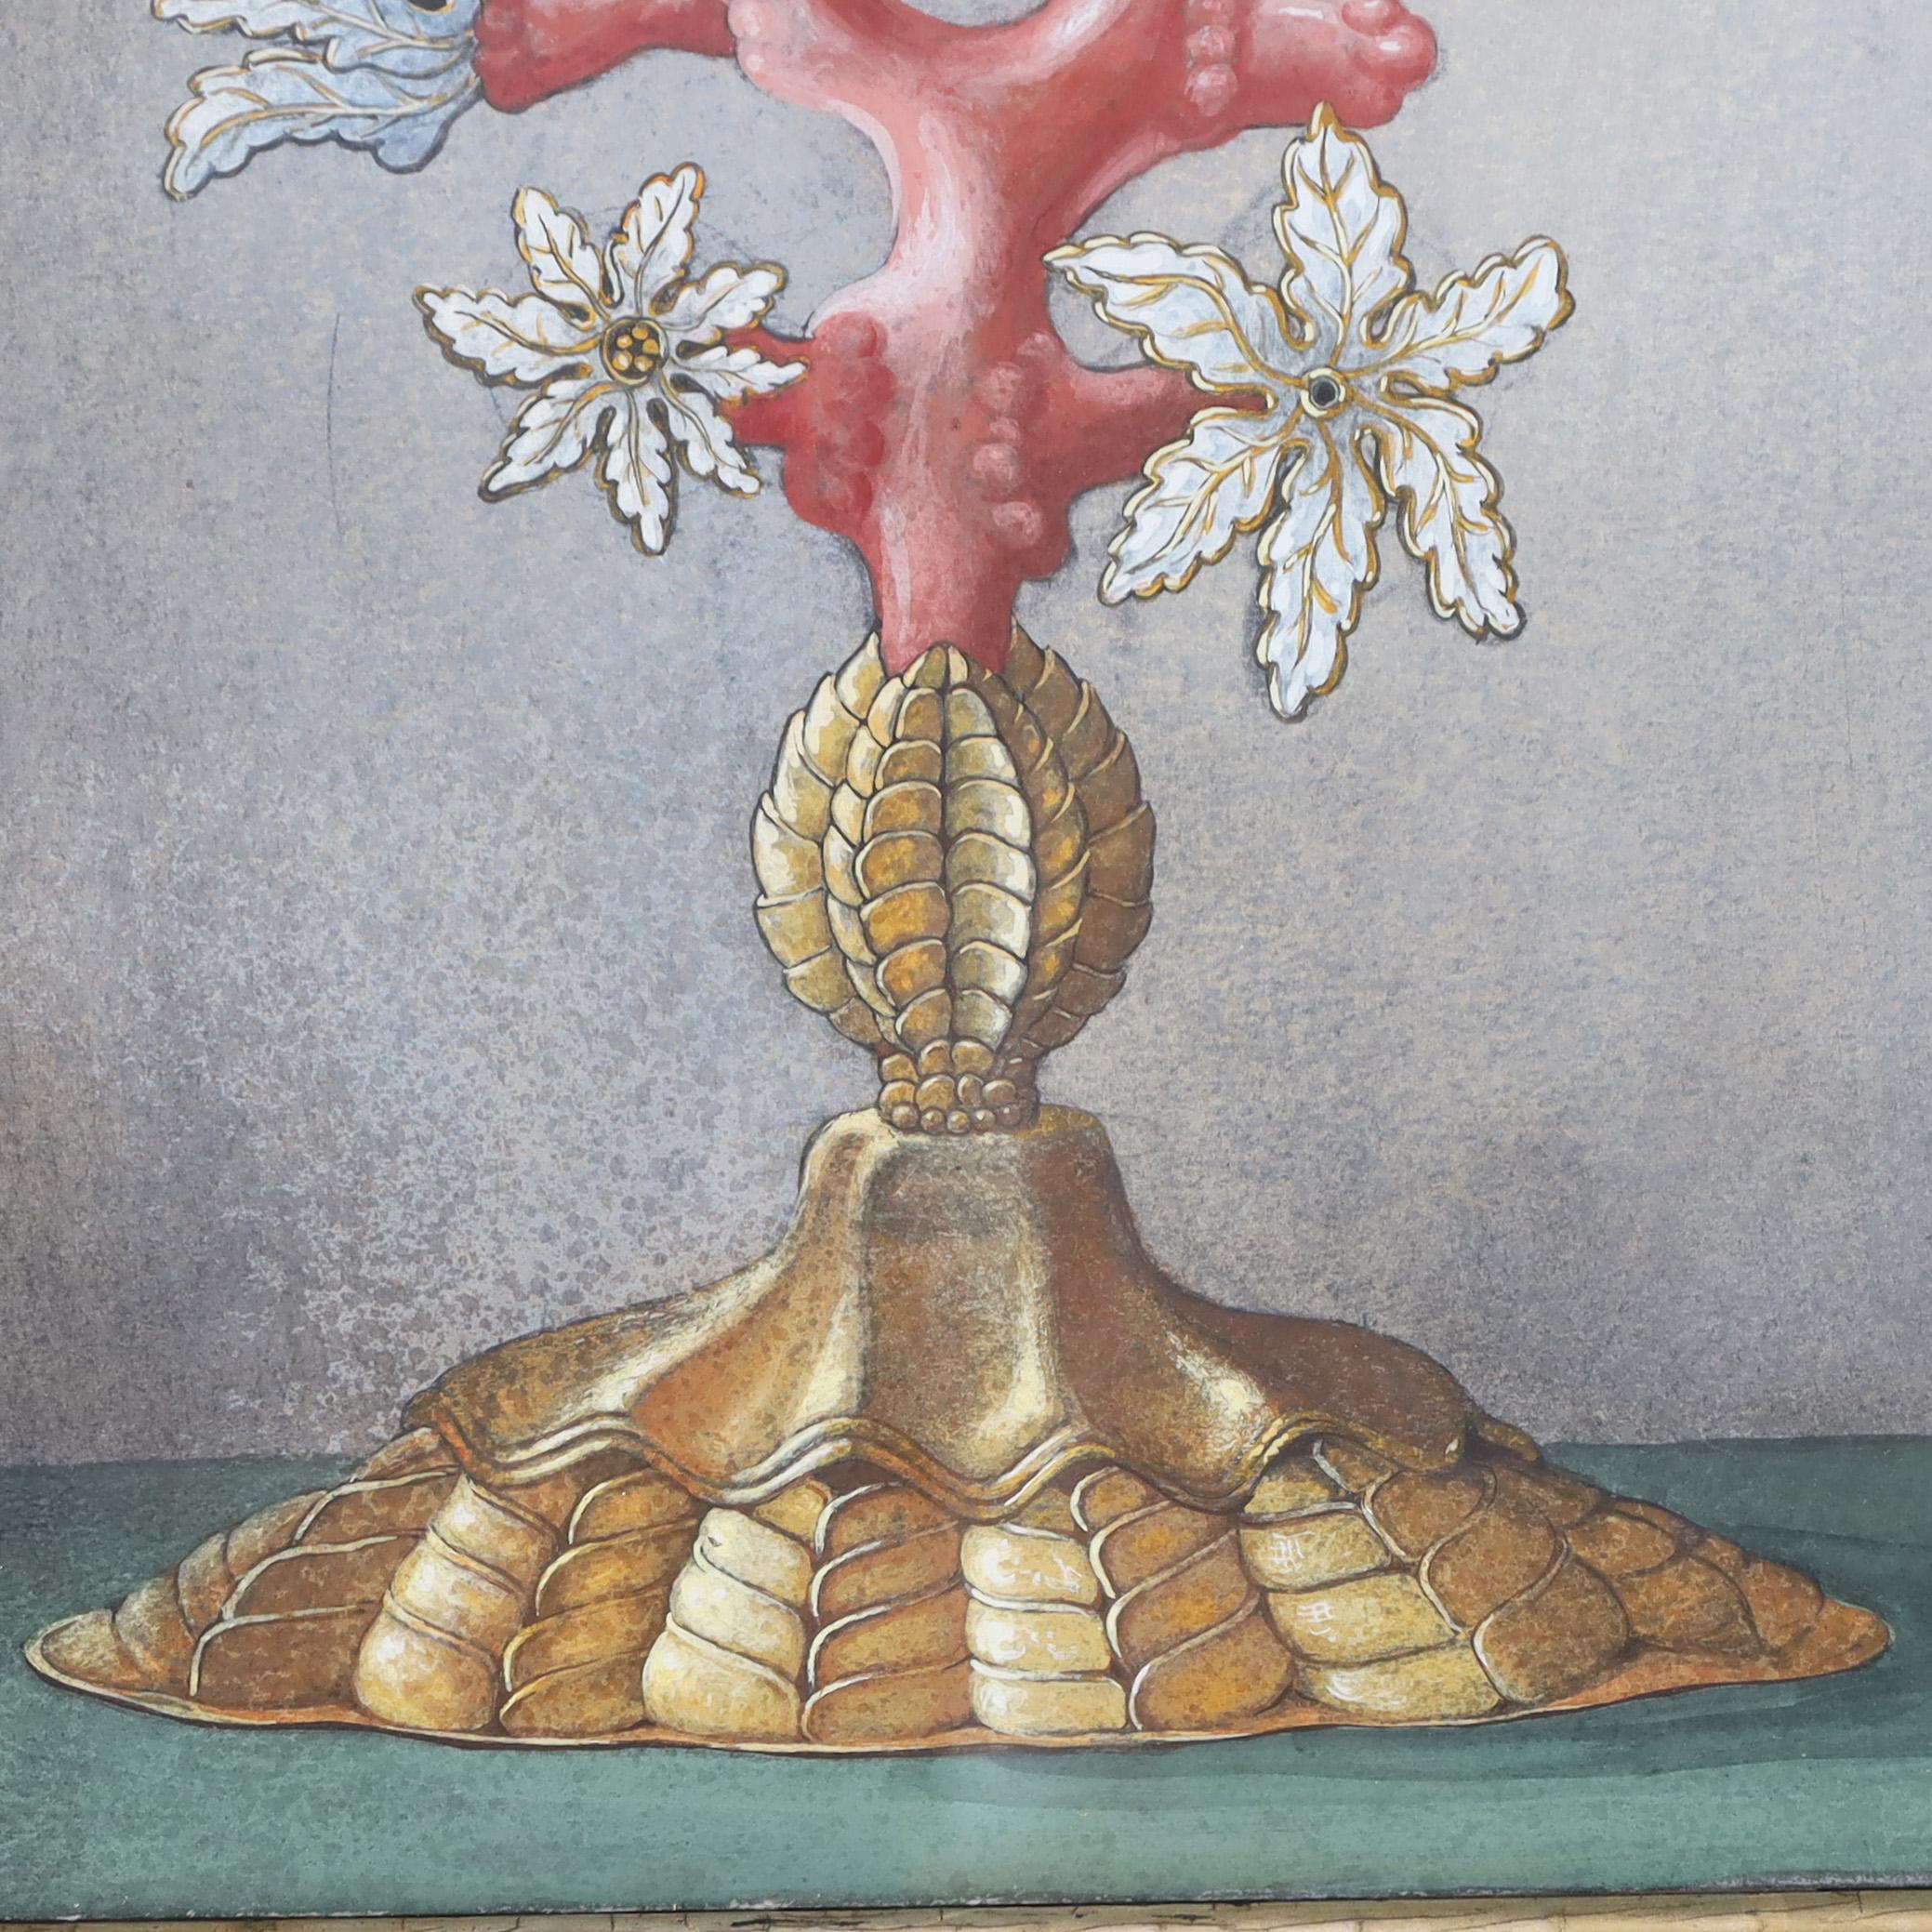 Hand-Painted Vintage Watercolor of a Fantastical Center Piece with Seahorse and Coral